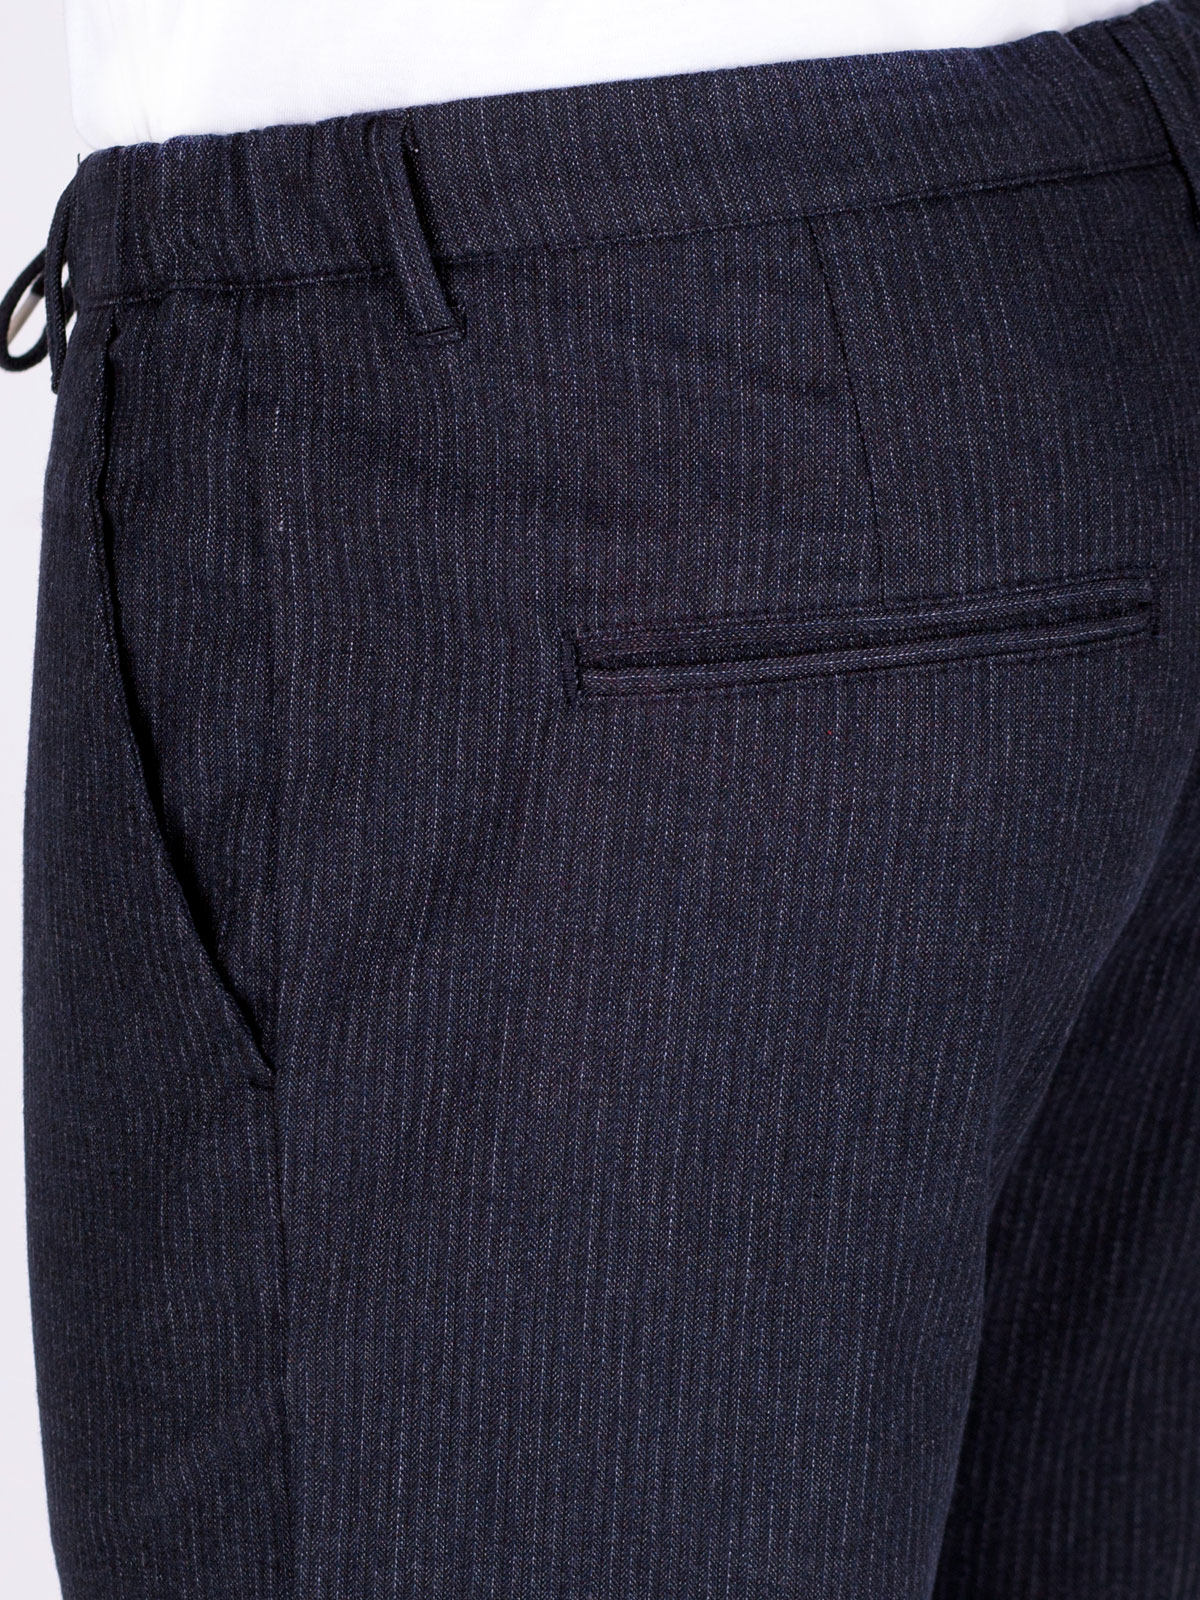 Blue striped trousers with laces - 60283 € 66.93 img4